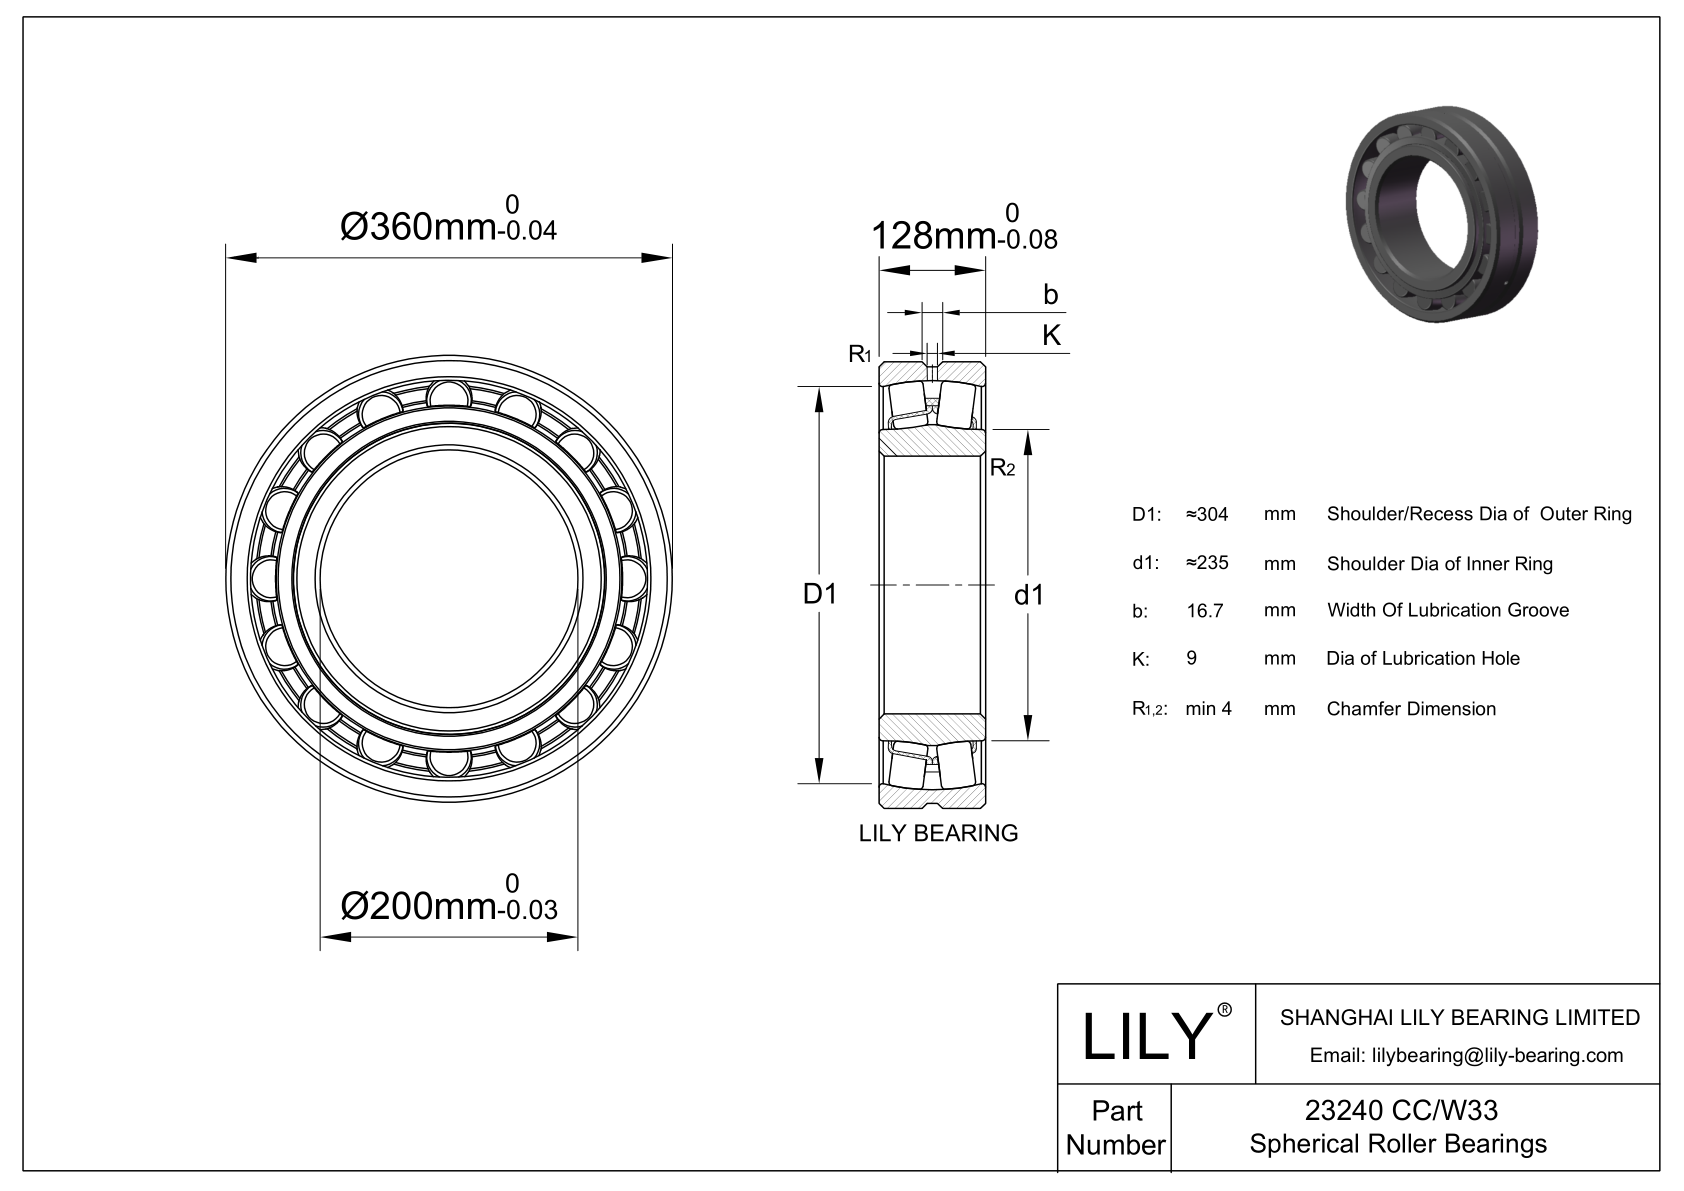 23240 CC/W33 Double Row Spherical Roller Bearing cad drawing